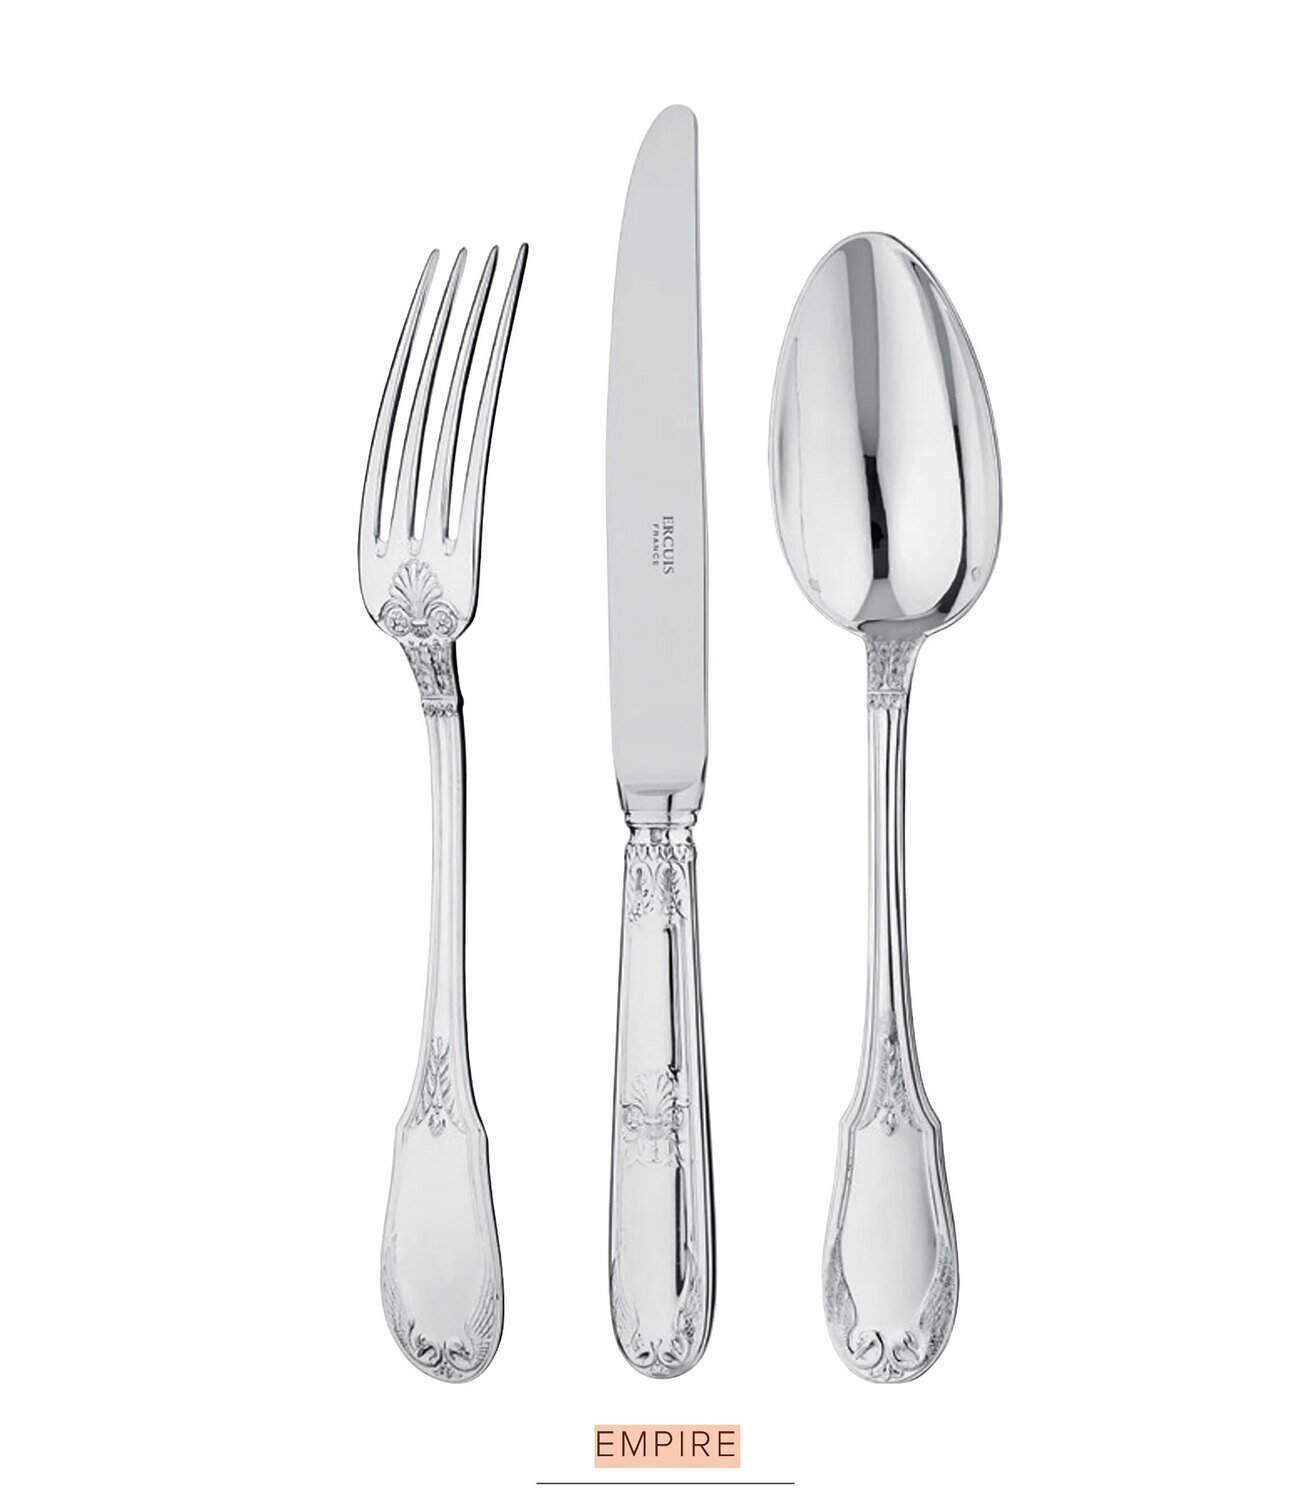 Ercuis Empire Carving Fork Sterling Silver F630490-45